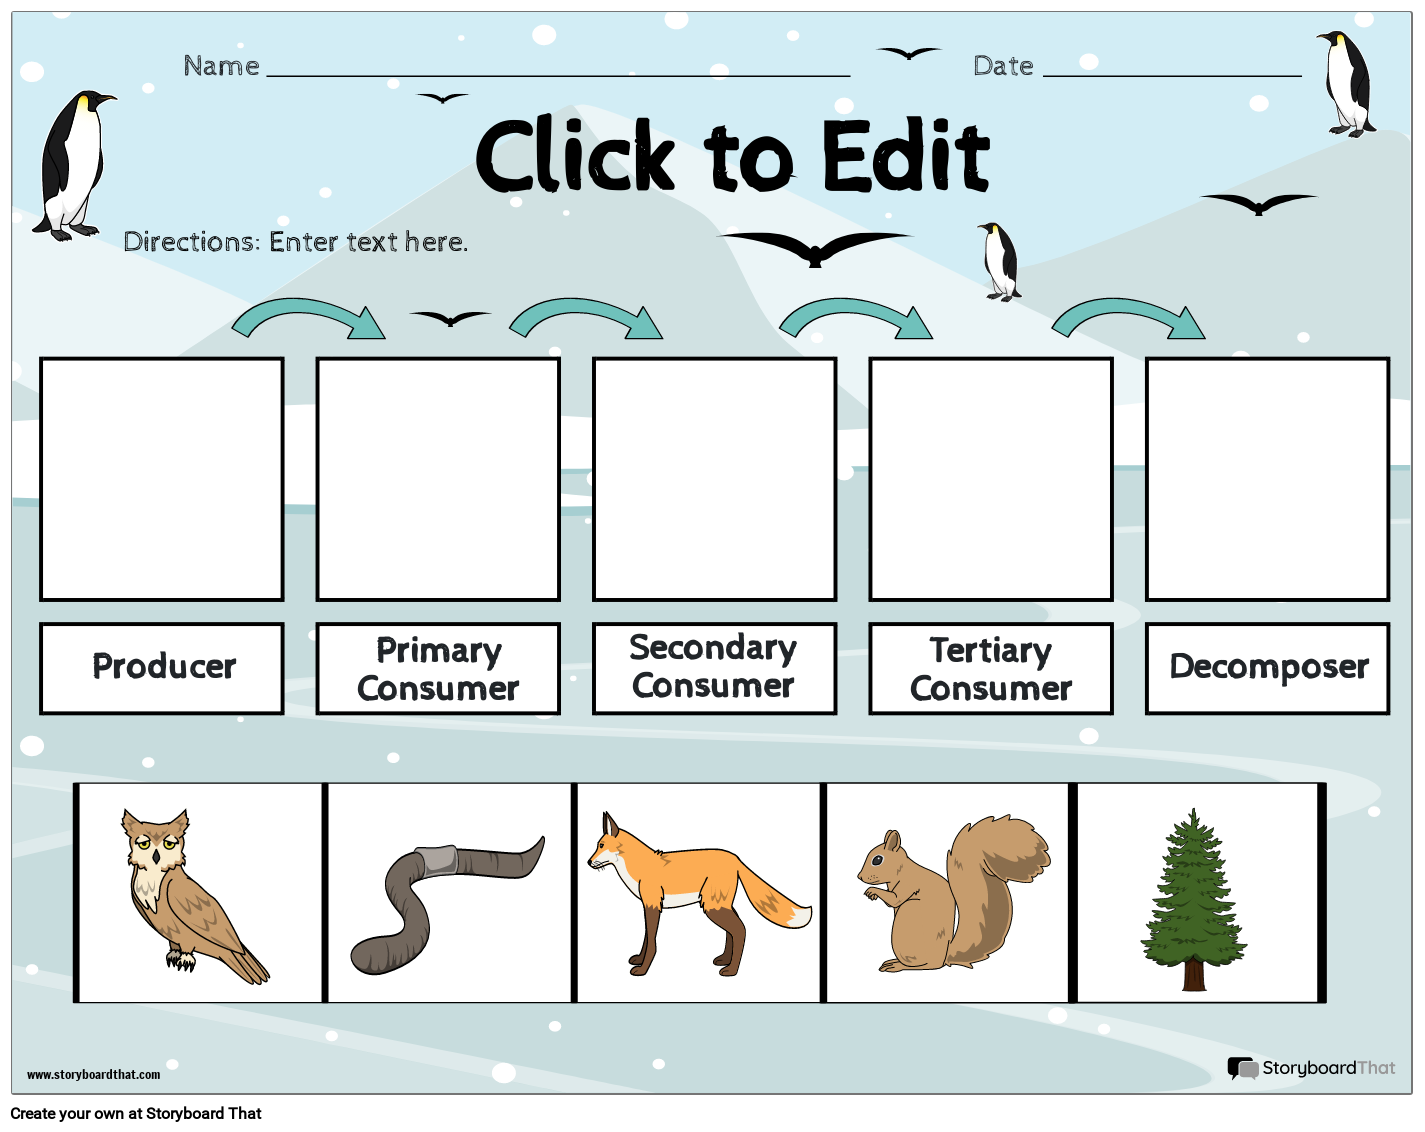 Print-ready Food Web Handout with Arctic Forest Design